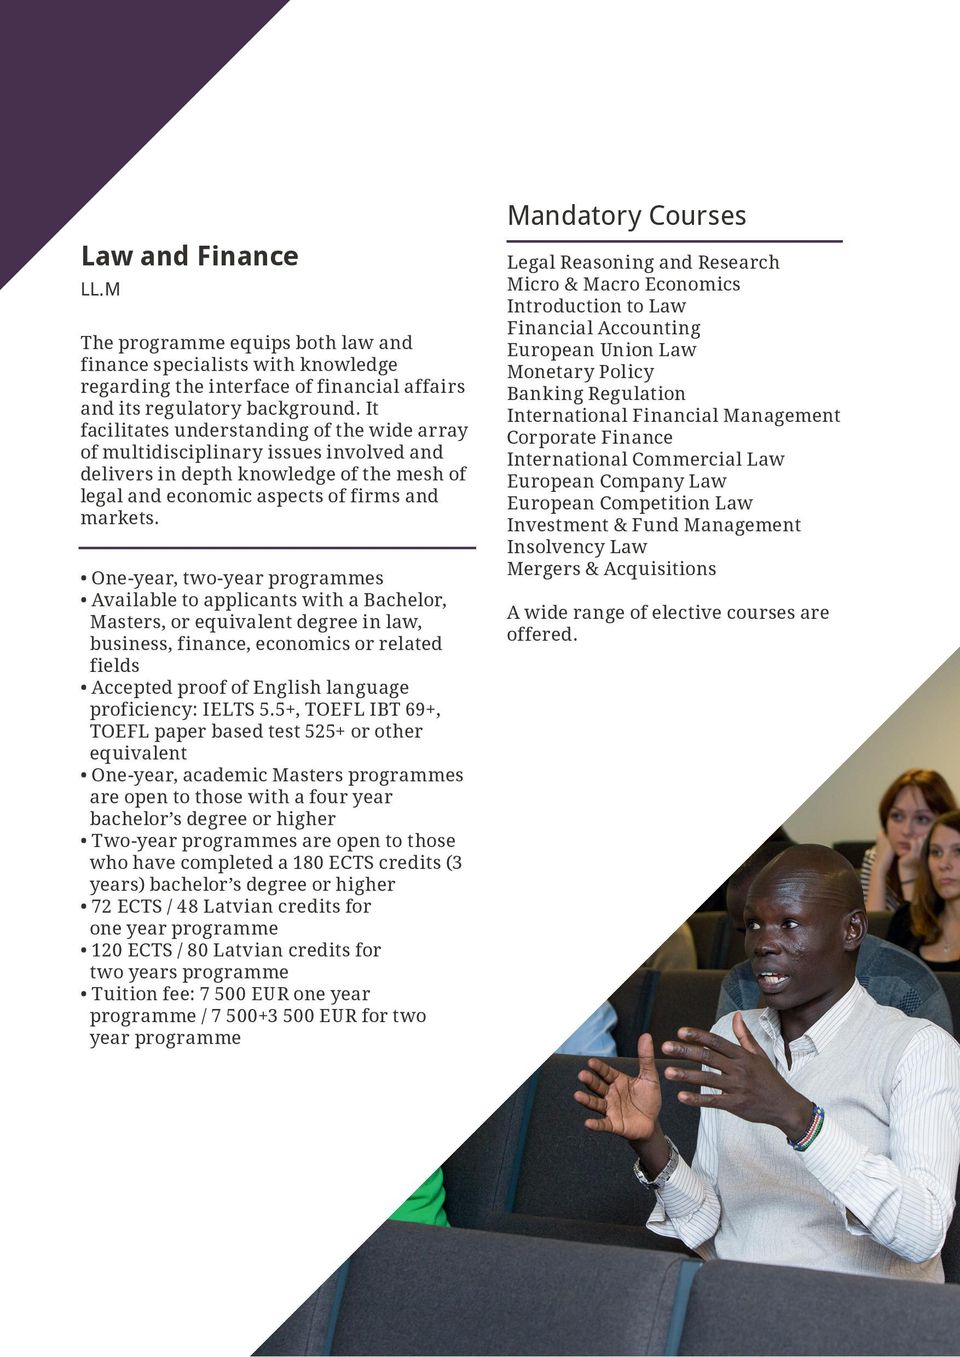 One-year, two-year programmes Available to applicants with a Bachelor, Masters, or equivalent degree in law, business, finance, economics or related fields Accepted proof of English language